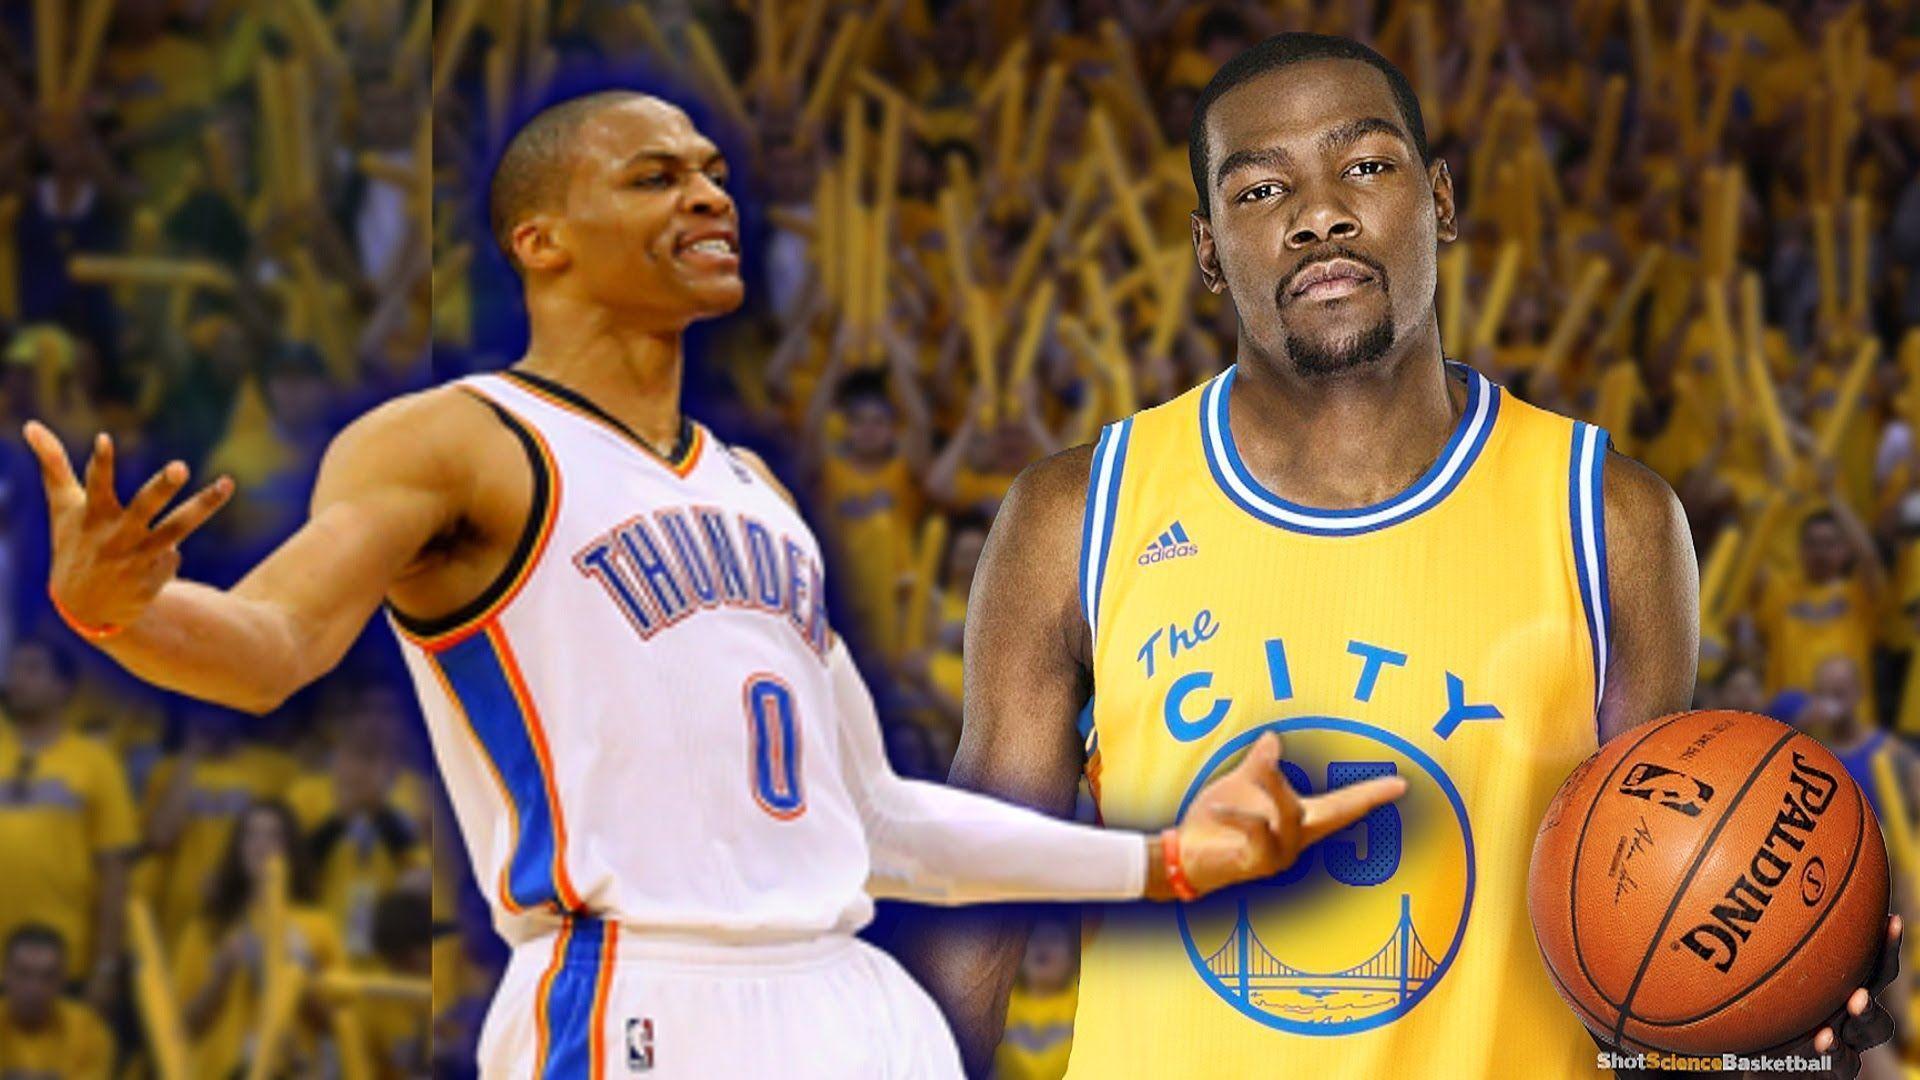 KEVIN DURANT VS RUSSELL WESTBROOK 1 ON 1 WARRIORS VS THUNDER 2017